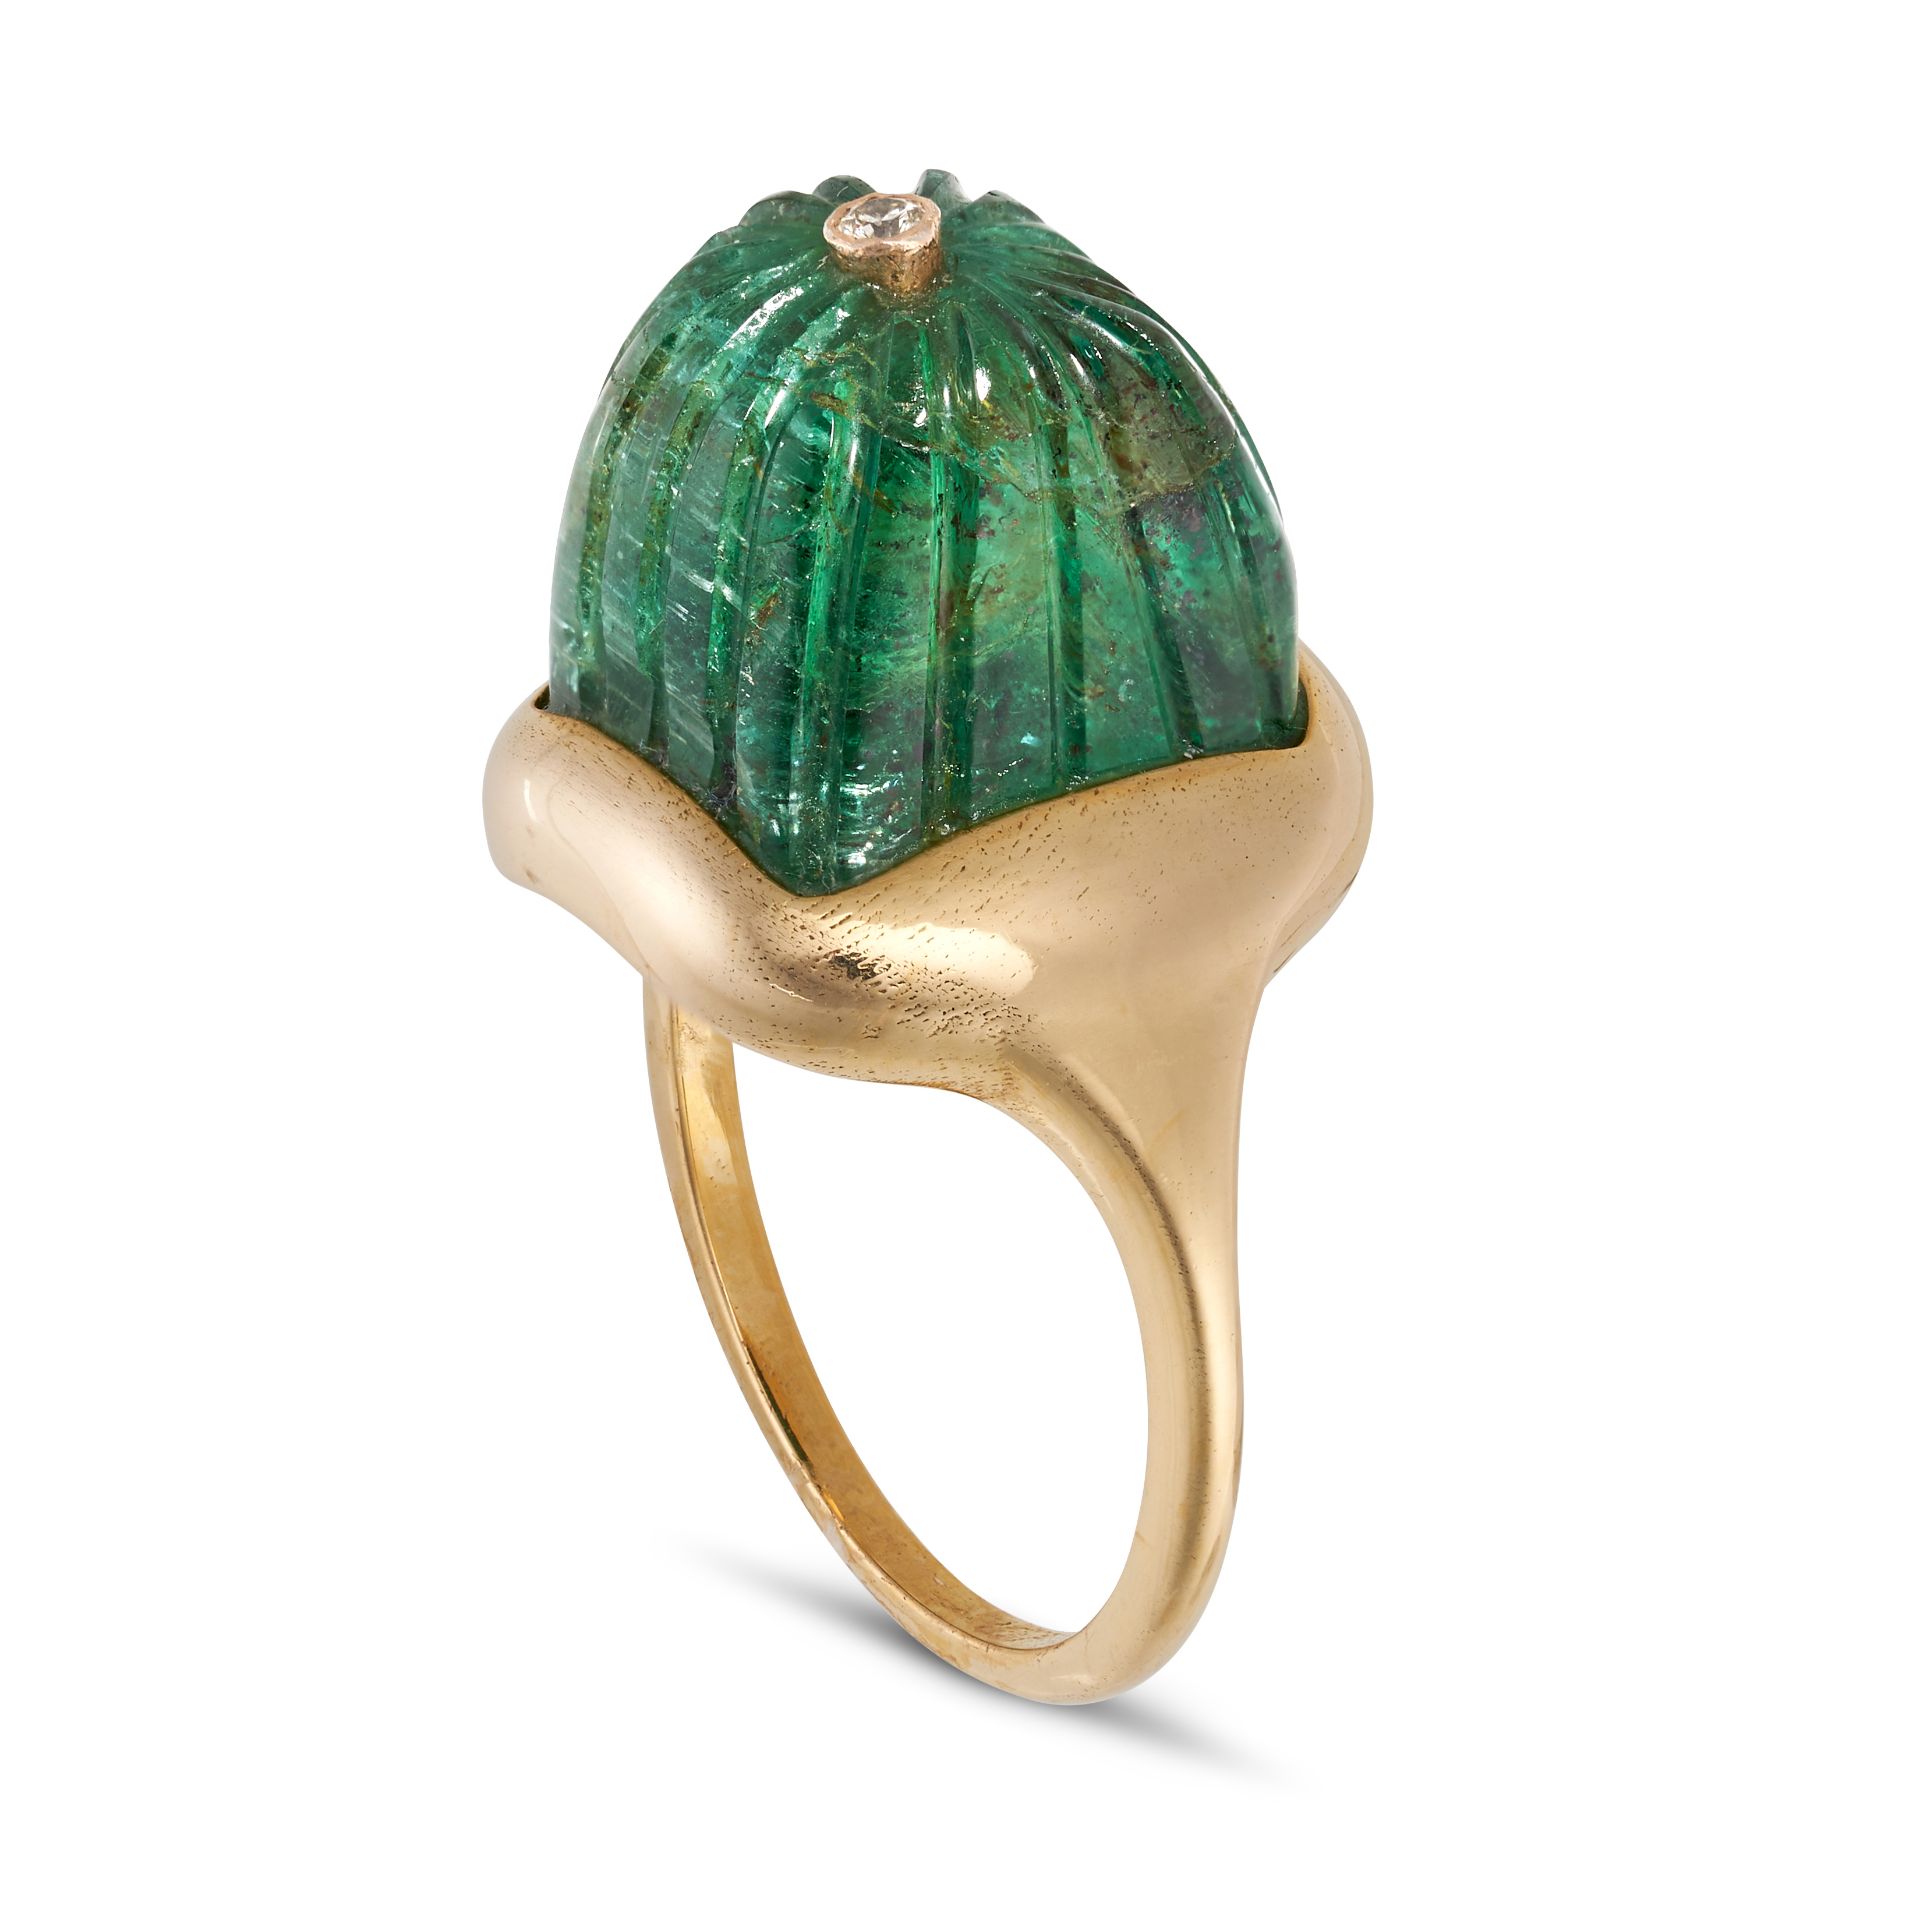 A CARVED EMERALD AND DIAMOND DRESS RING in 14ct yellow gold, set with a carved emerald accented b...